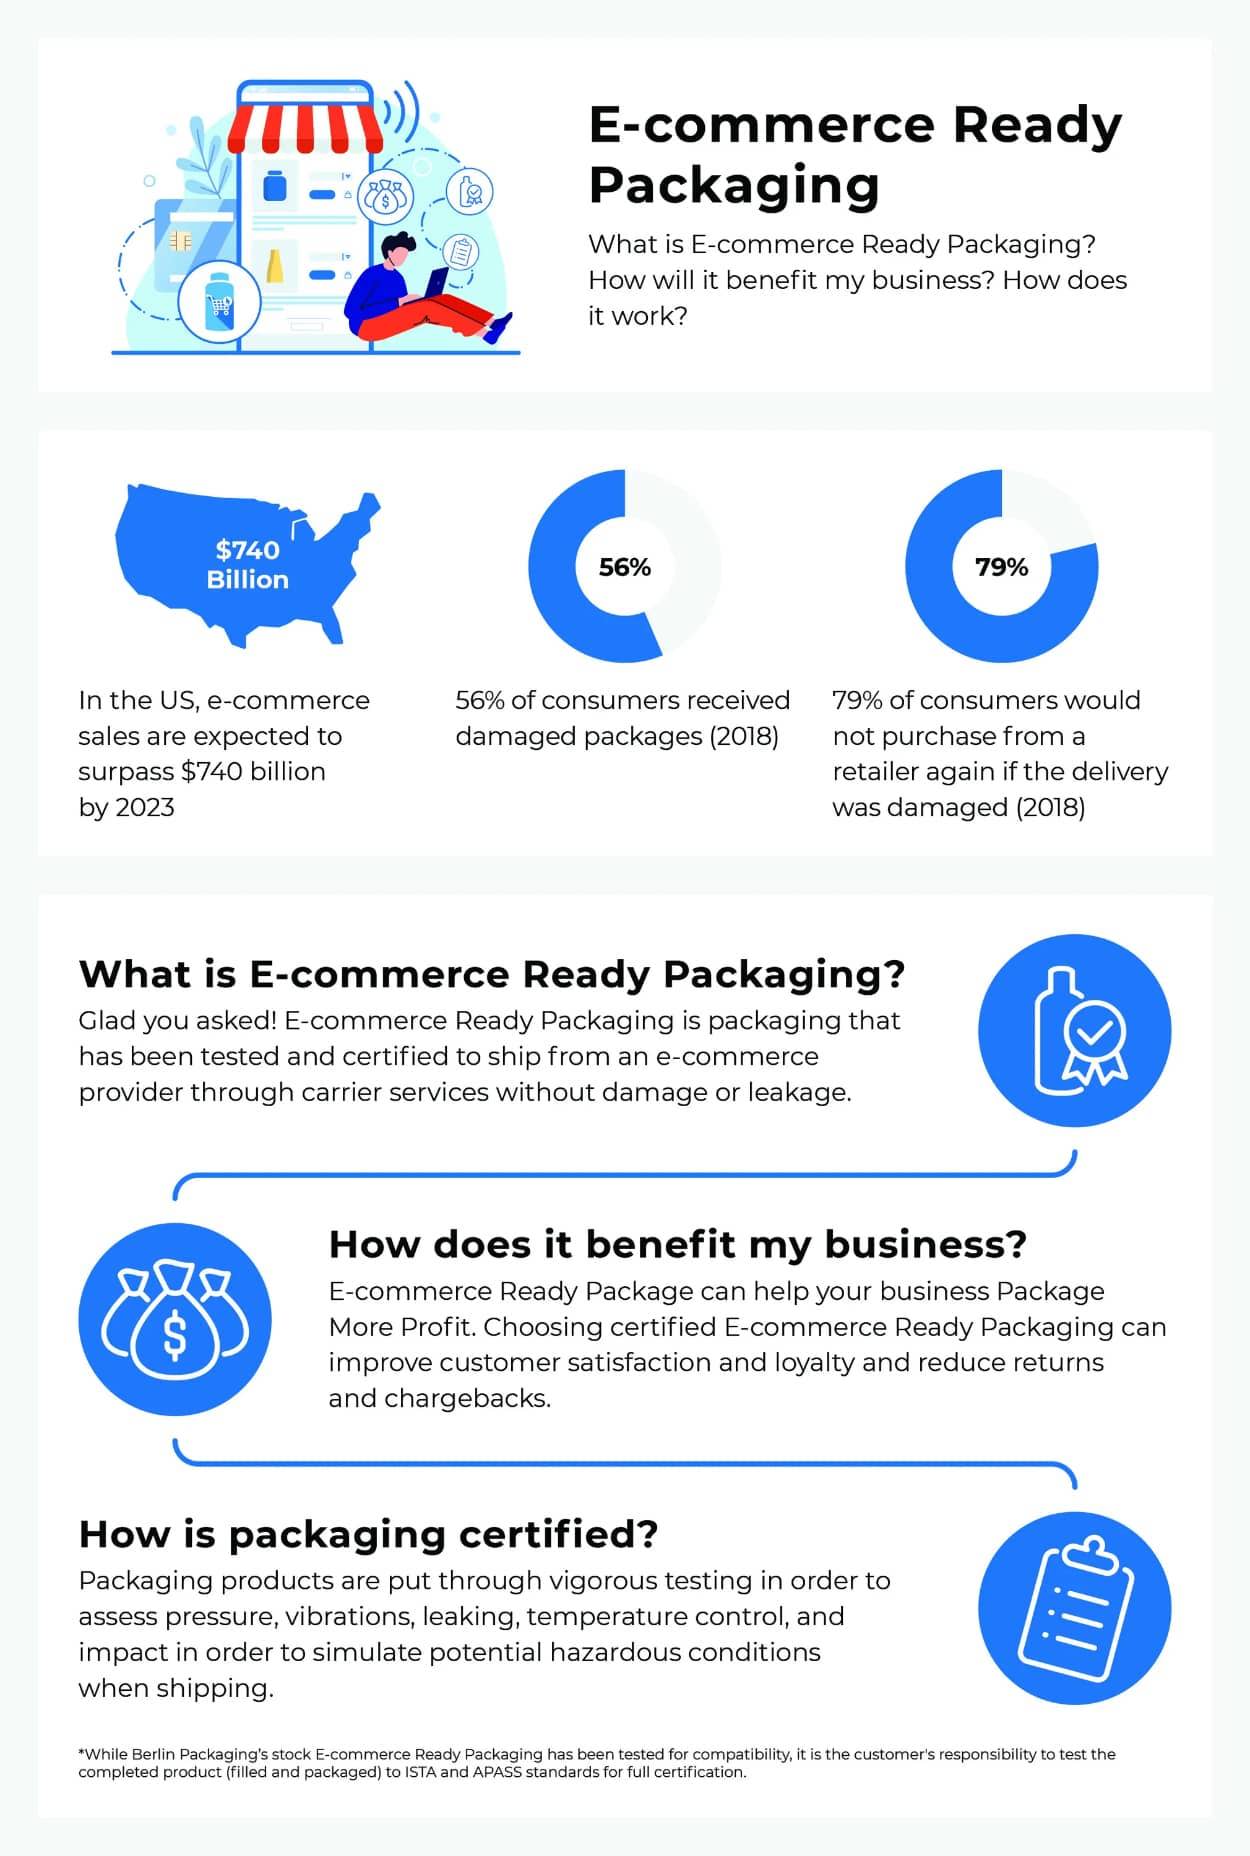 E-commerce Ready Packaging